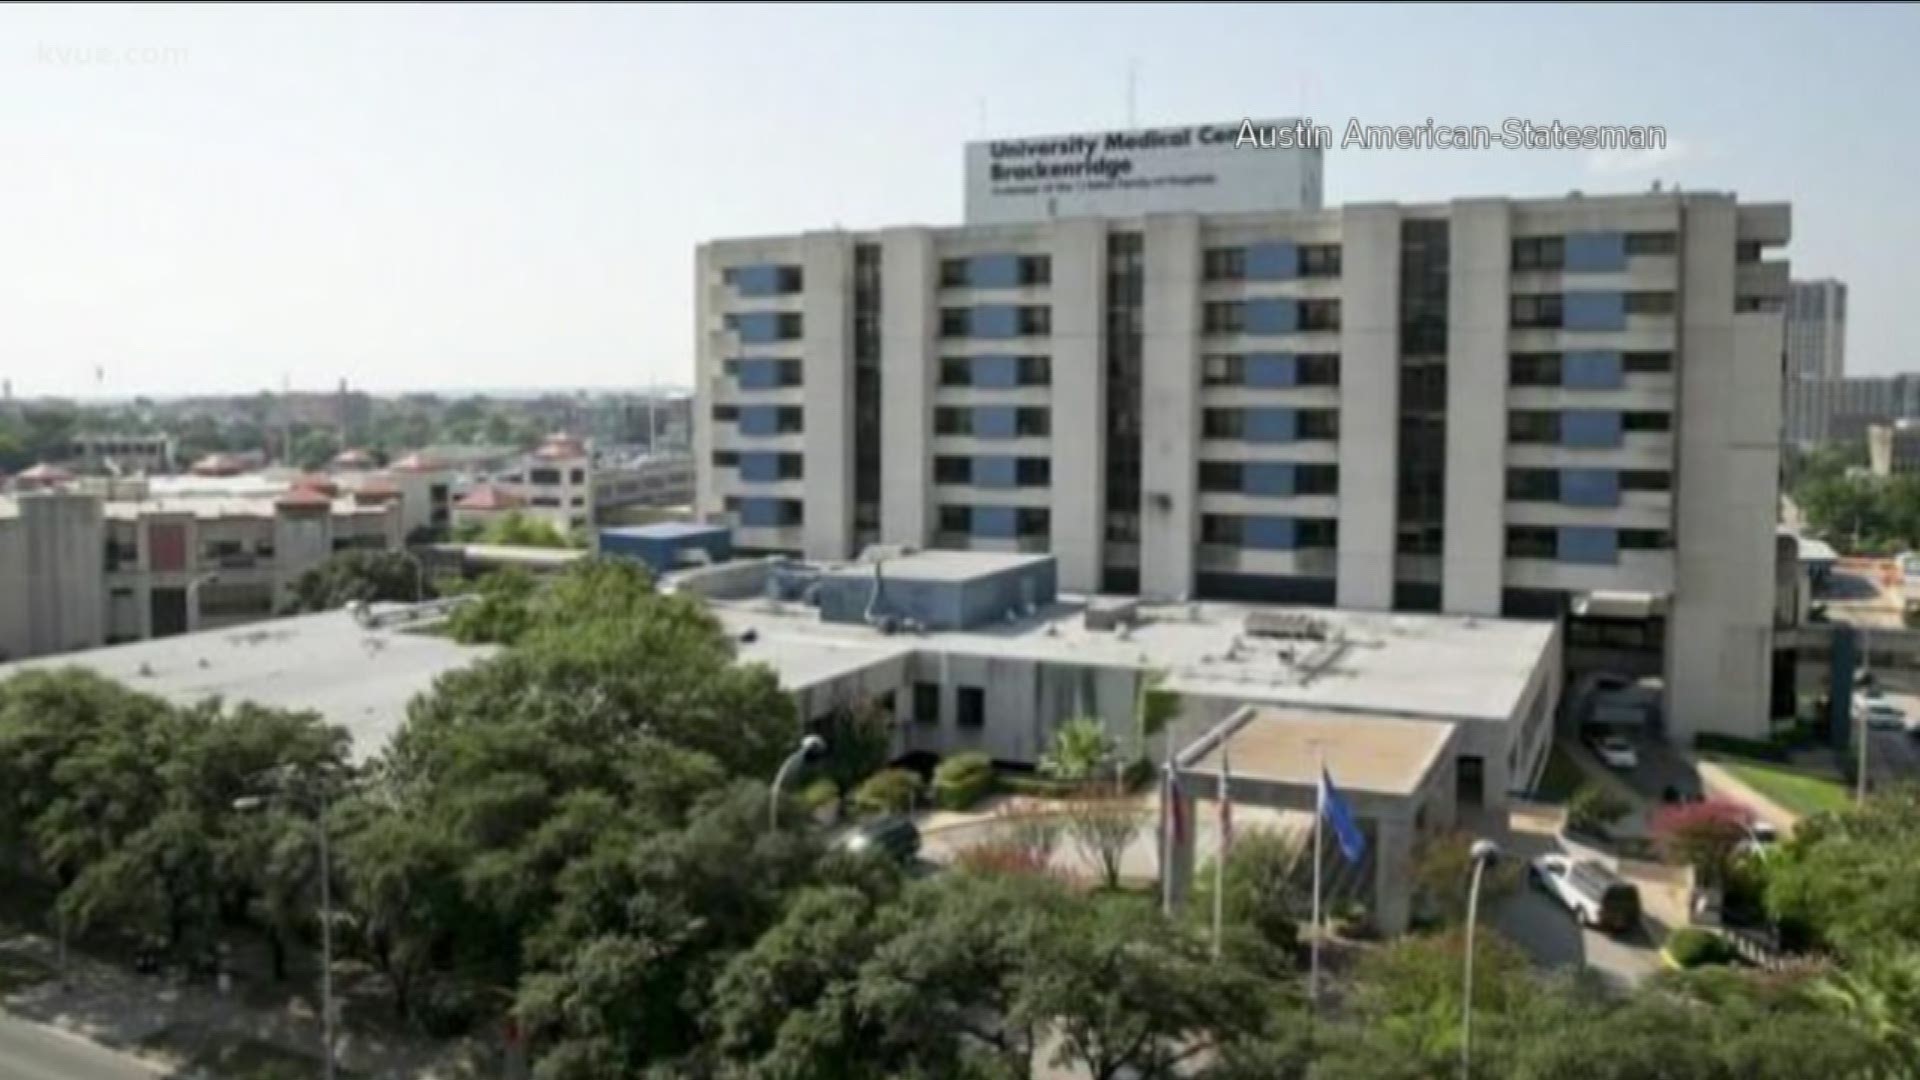 The University Medical Center Brackenridge campus closed in 2017 and now a new building is going up on the property.